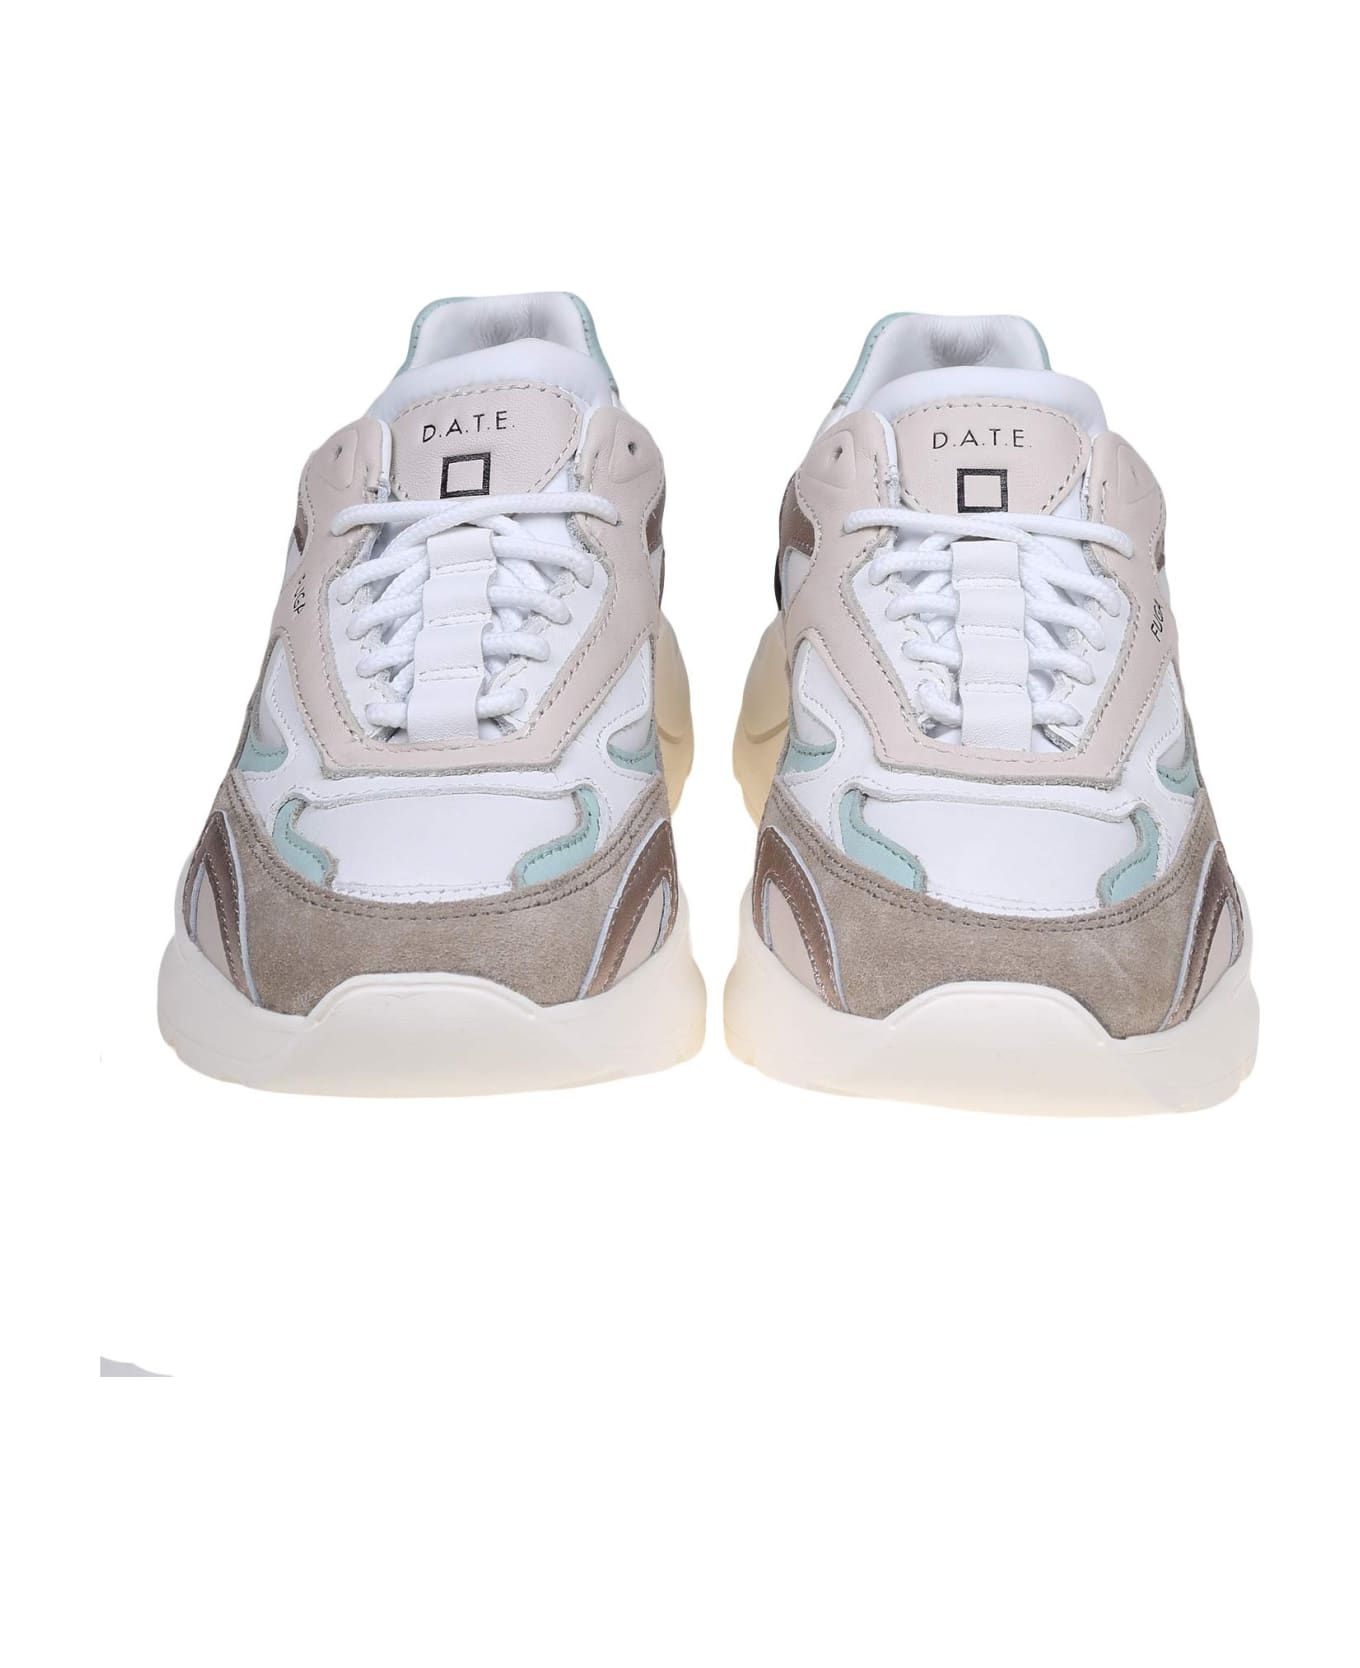 D.A.T.E. Fuga Sneakers In White/ Cream Leather And your - Cream